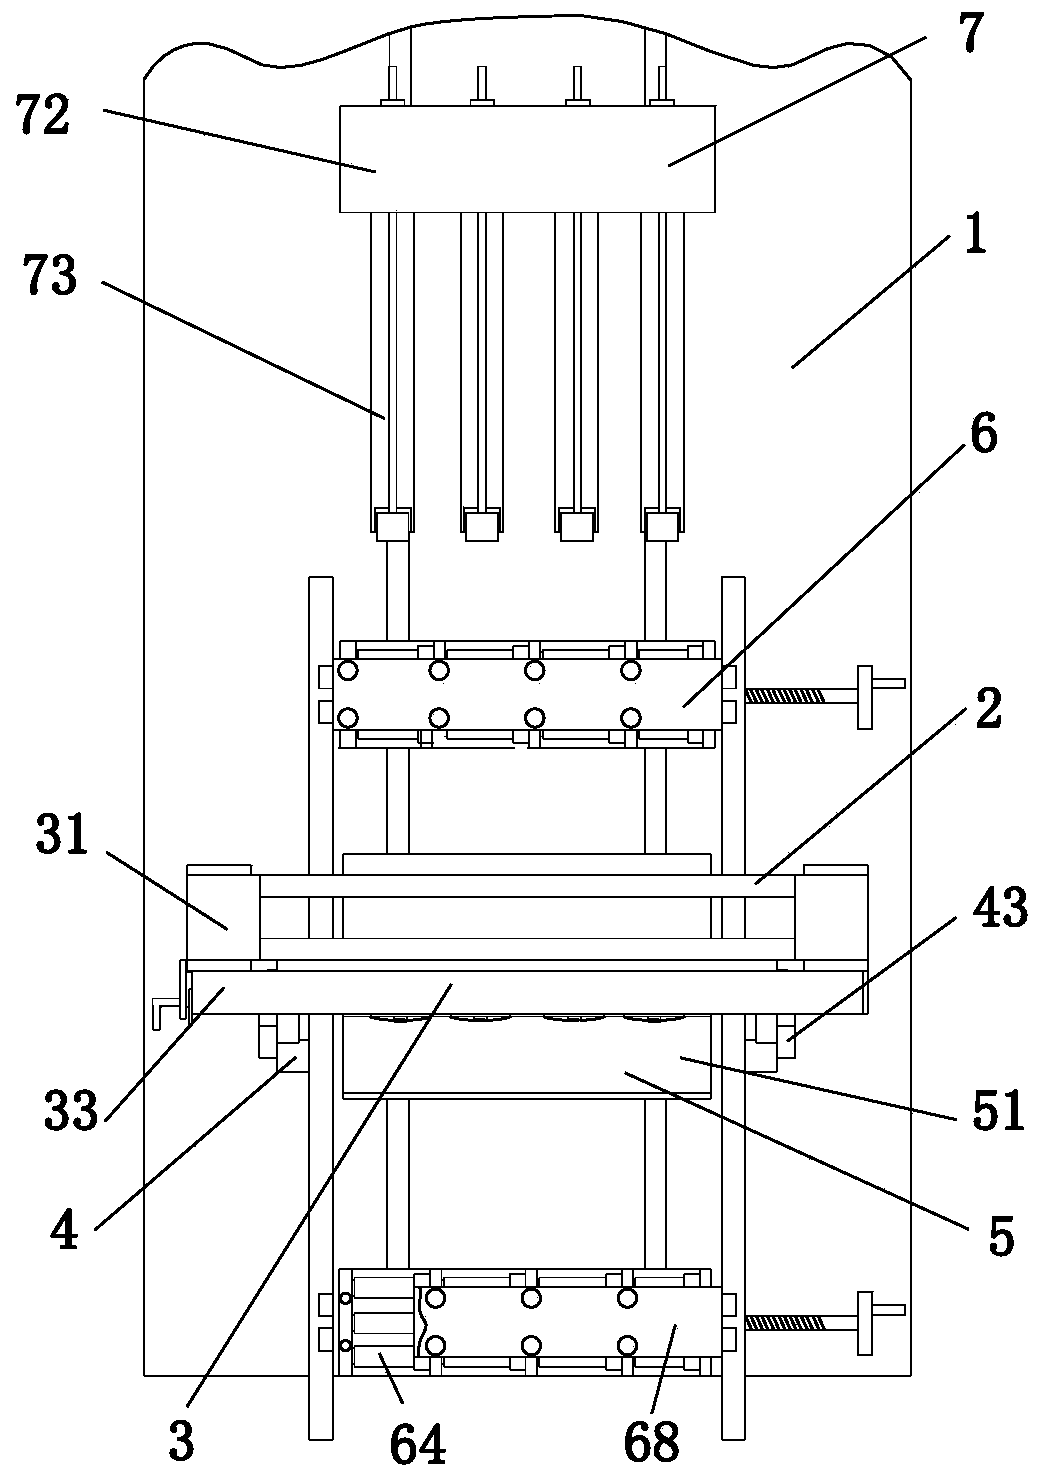 A stainless steel pipe bevel cutting machine